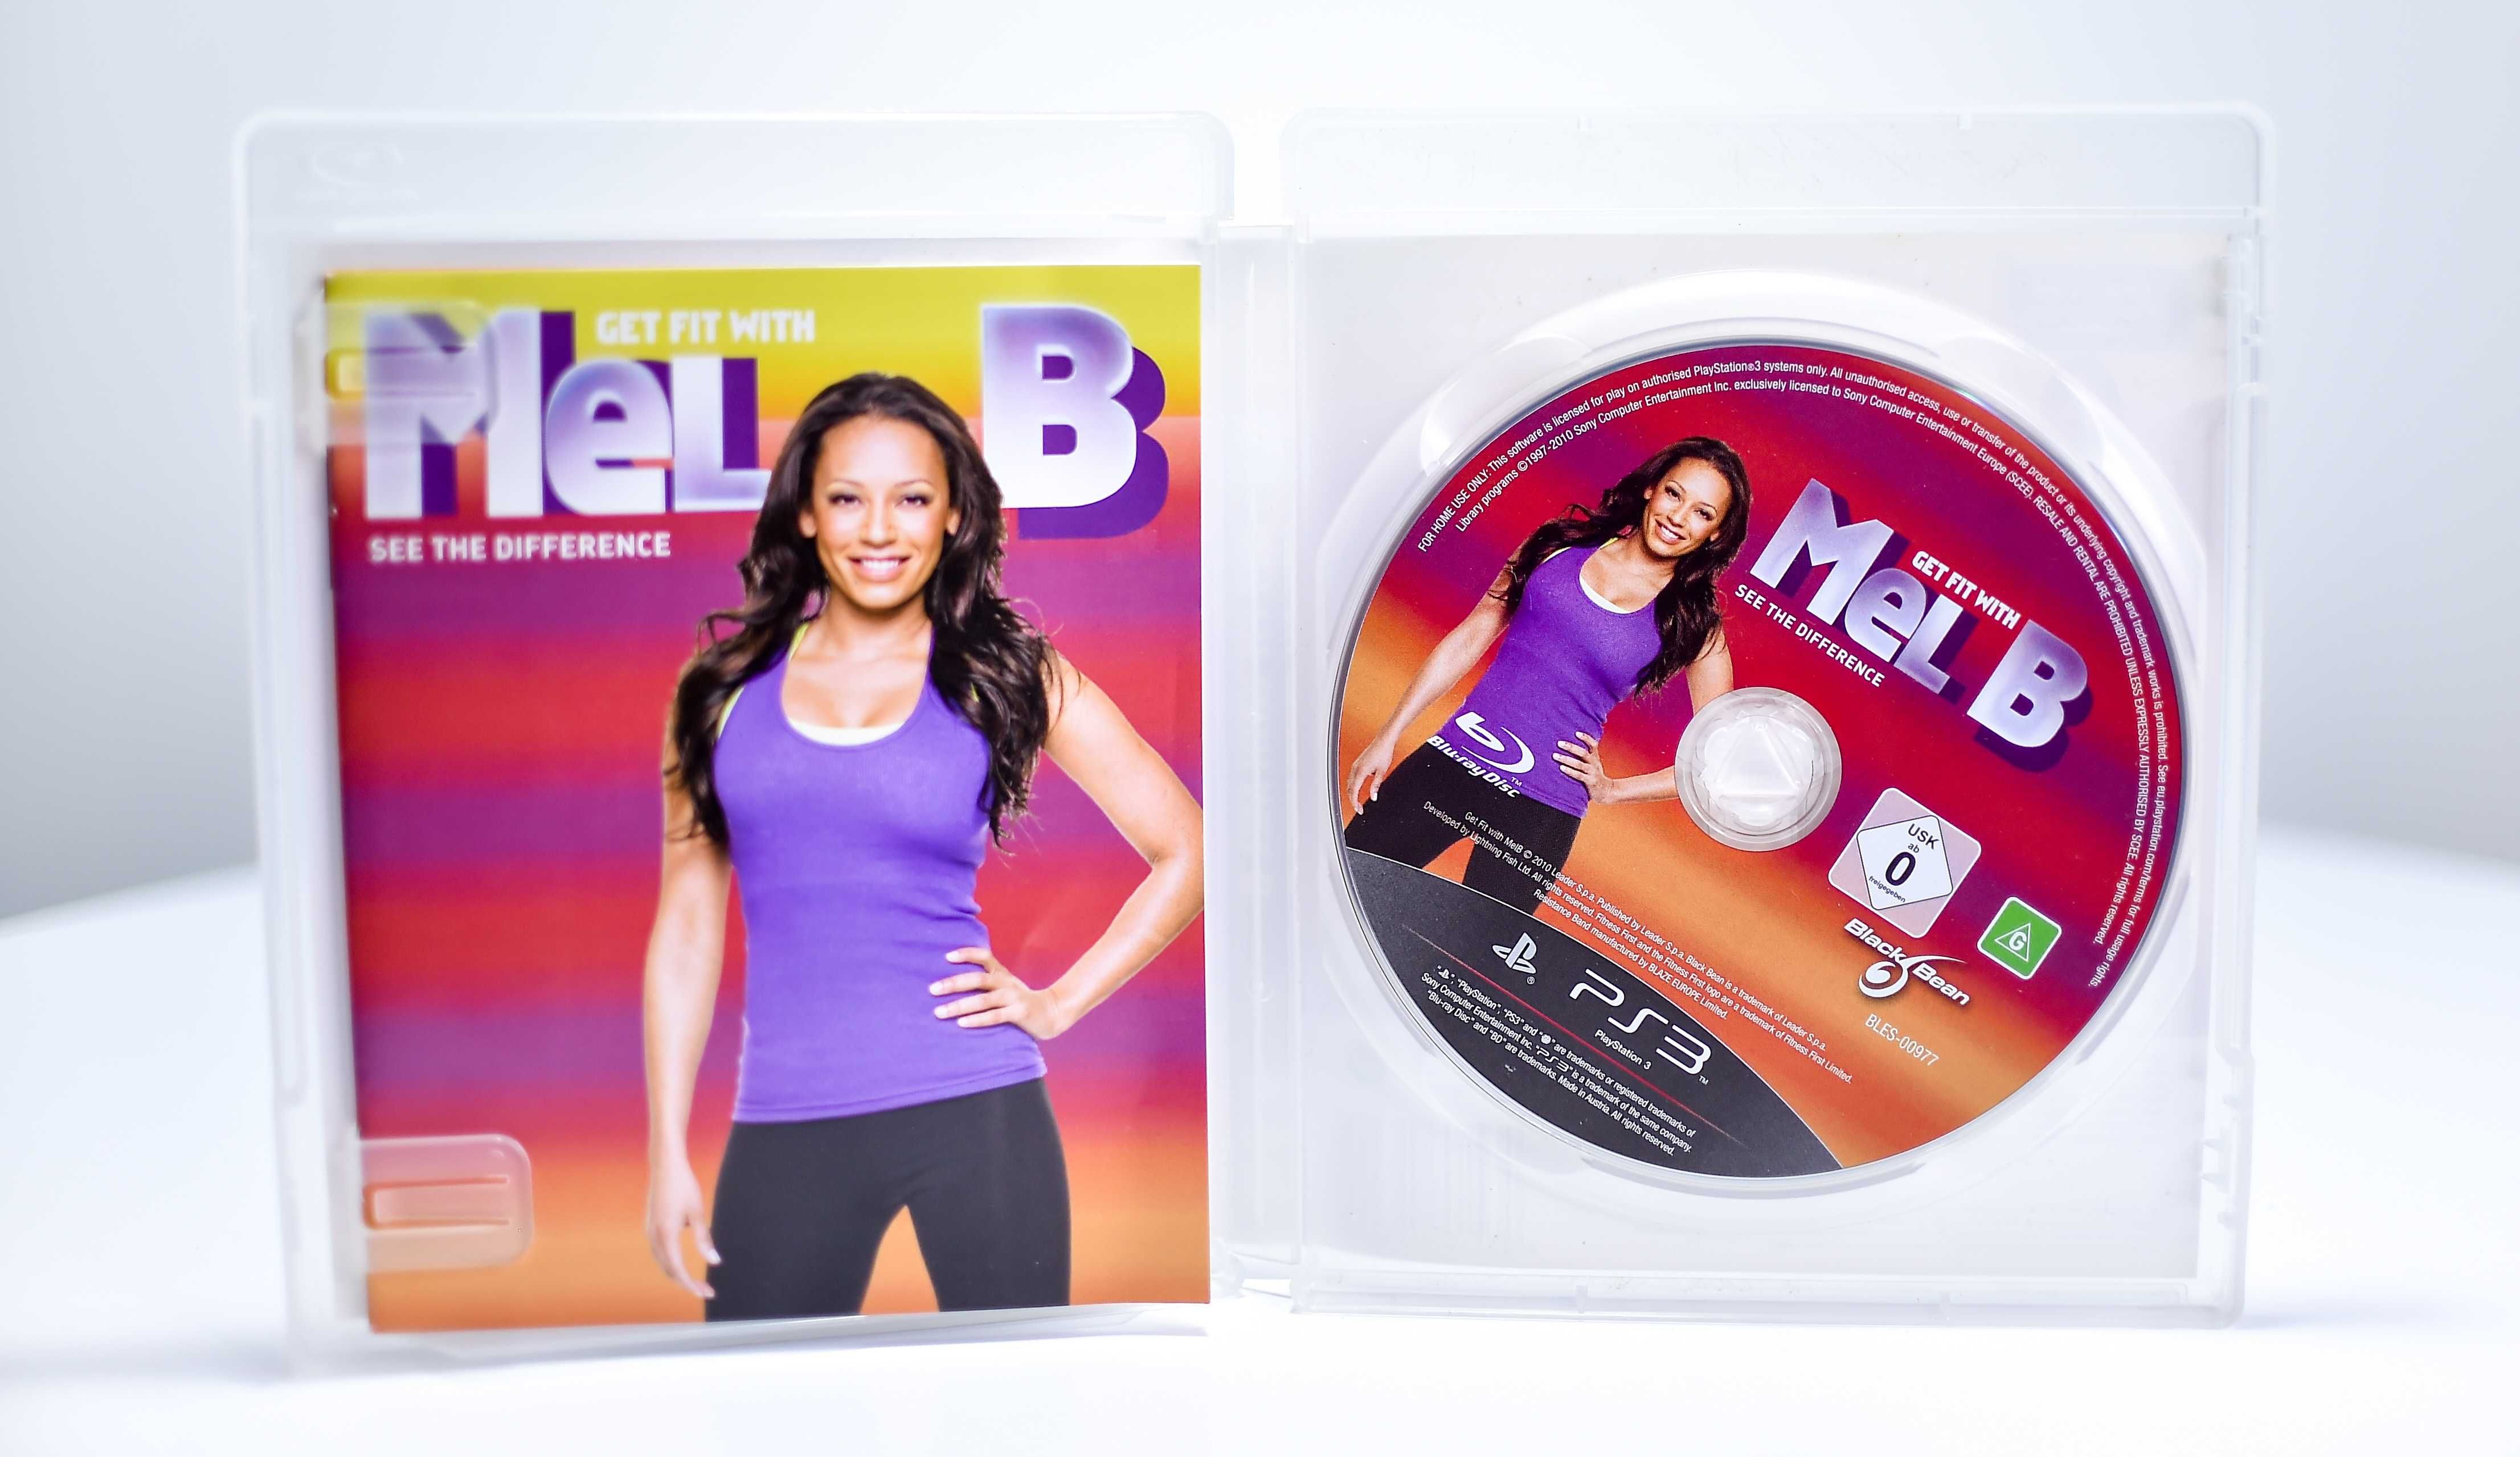 Gra Ps3 # Get Fit With Mel B